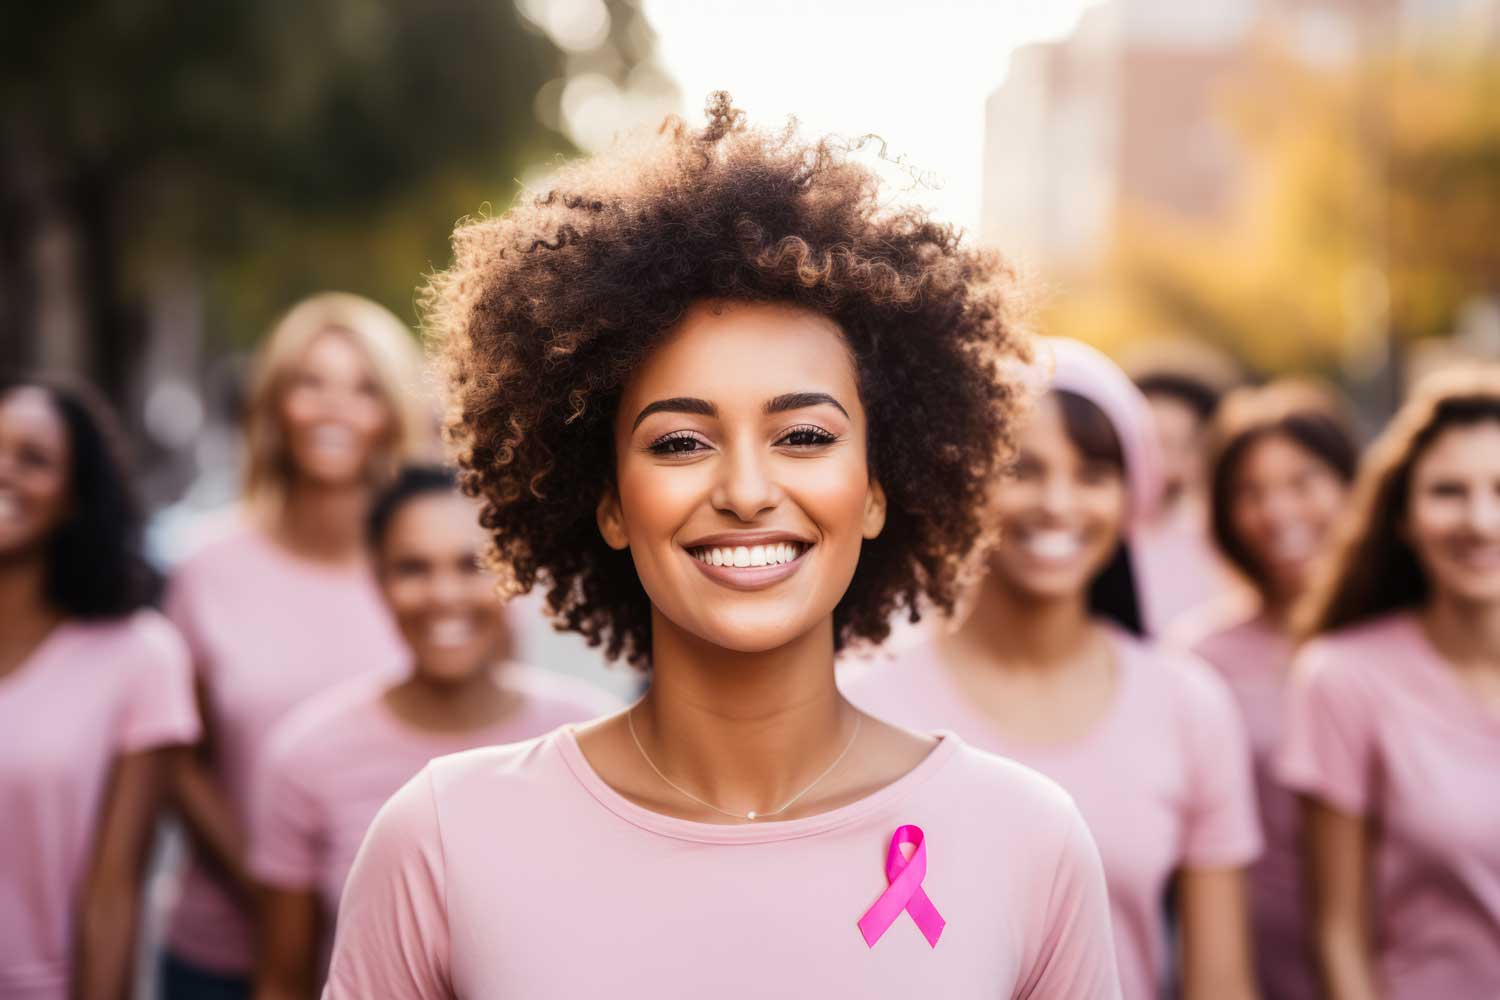 Group of women wearing pink gather for Breast Cancer Awareness Walk